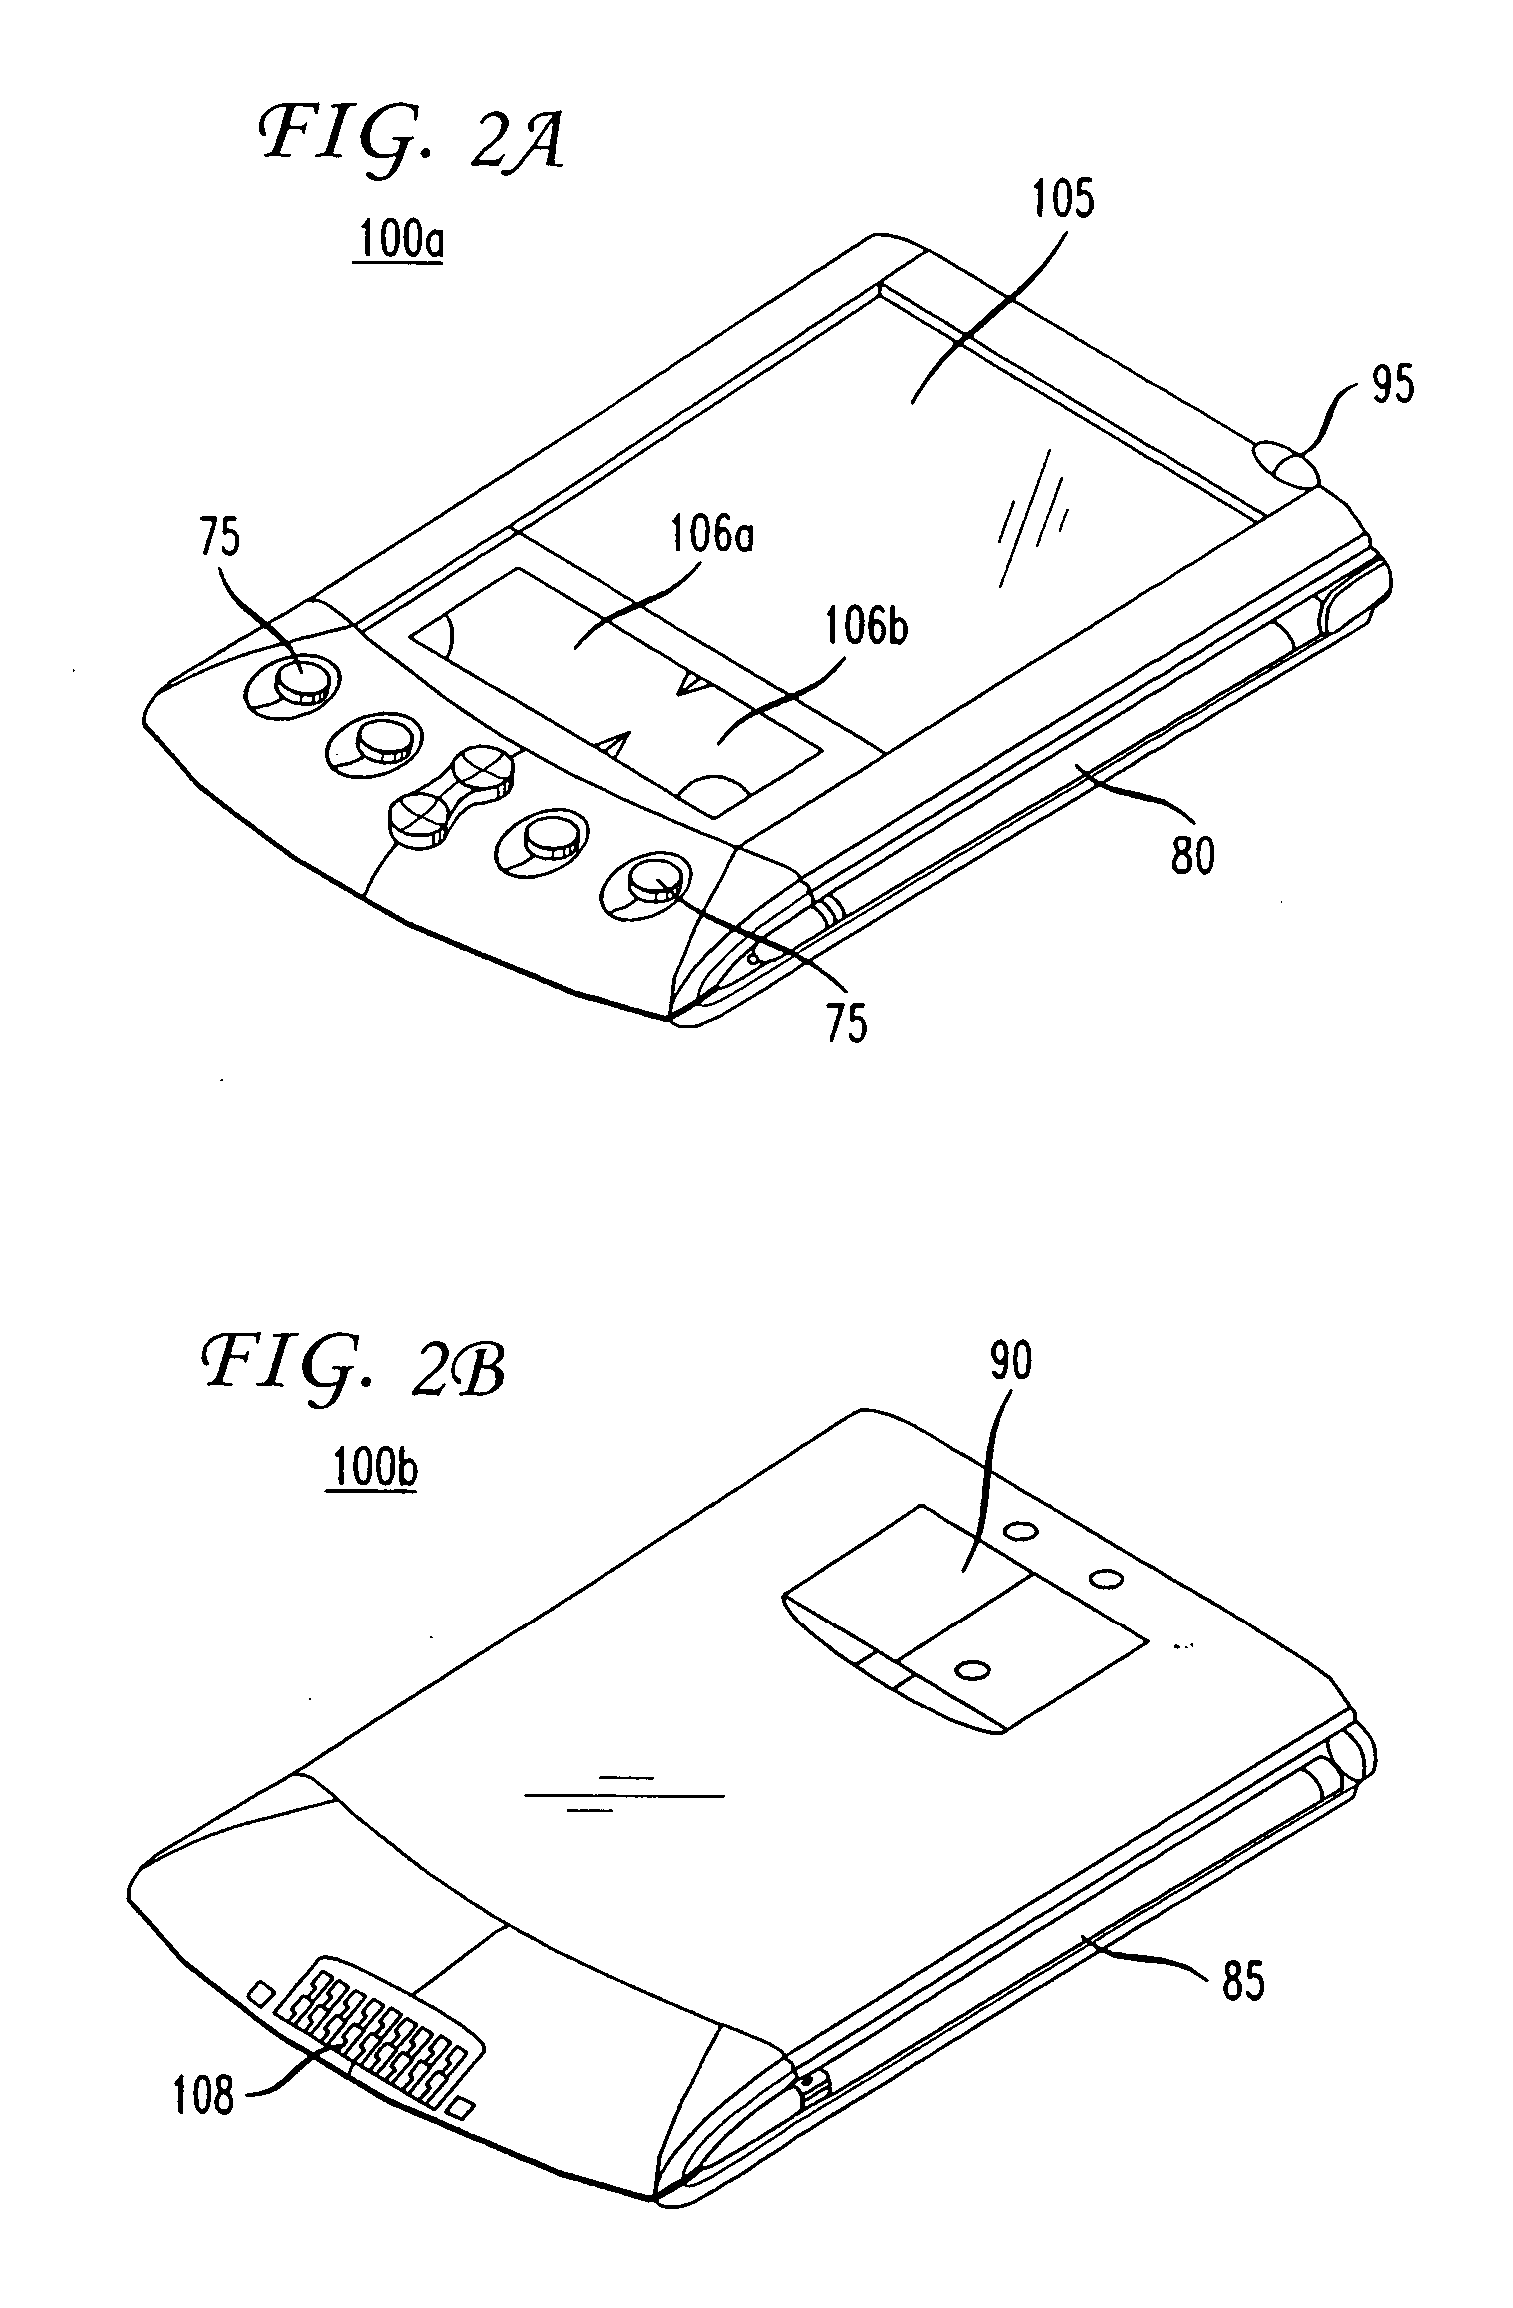 Method and apparatus for using a color table scheme for displaying information on either color or monochrome display